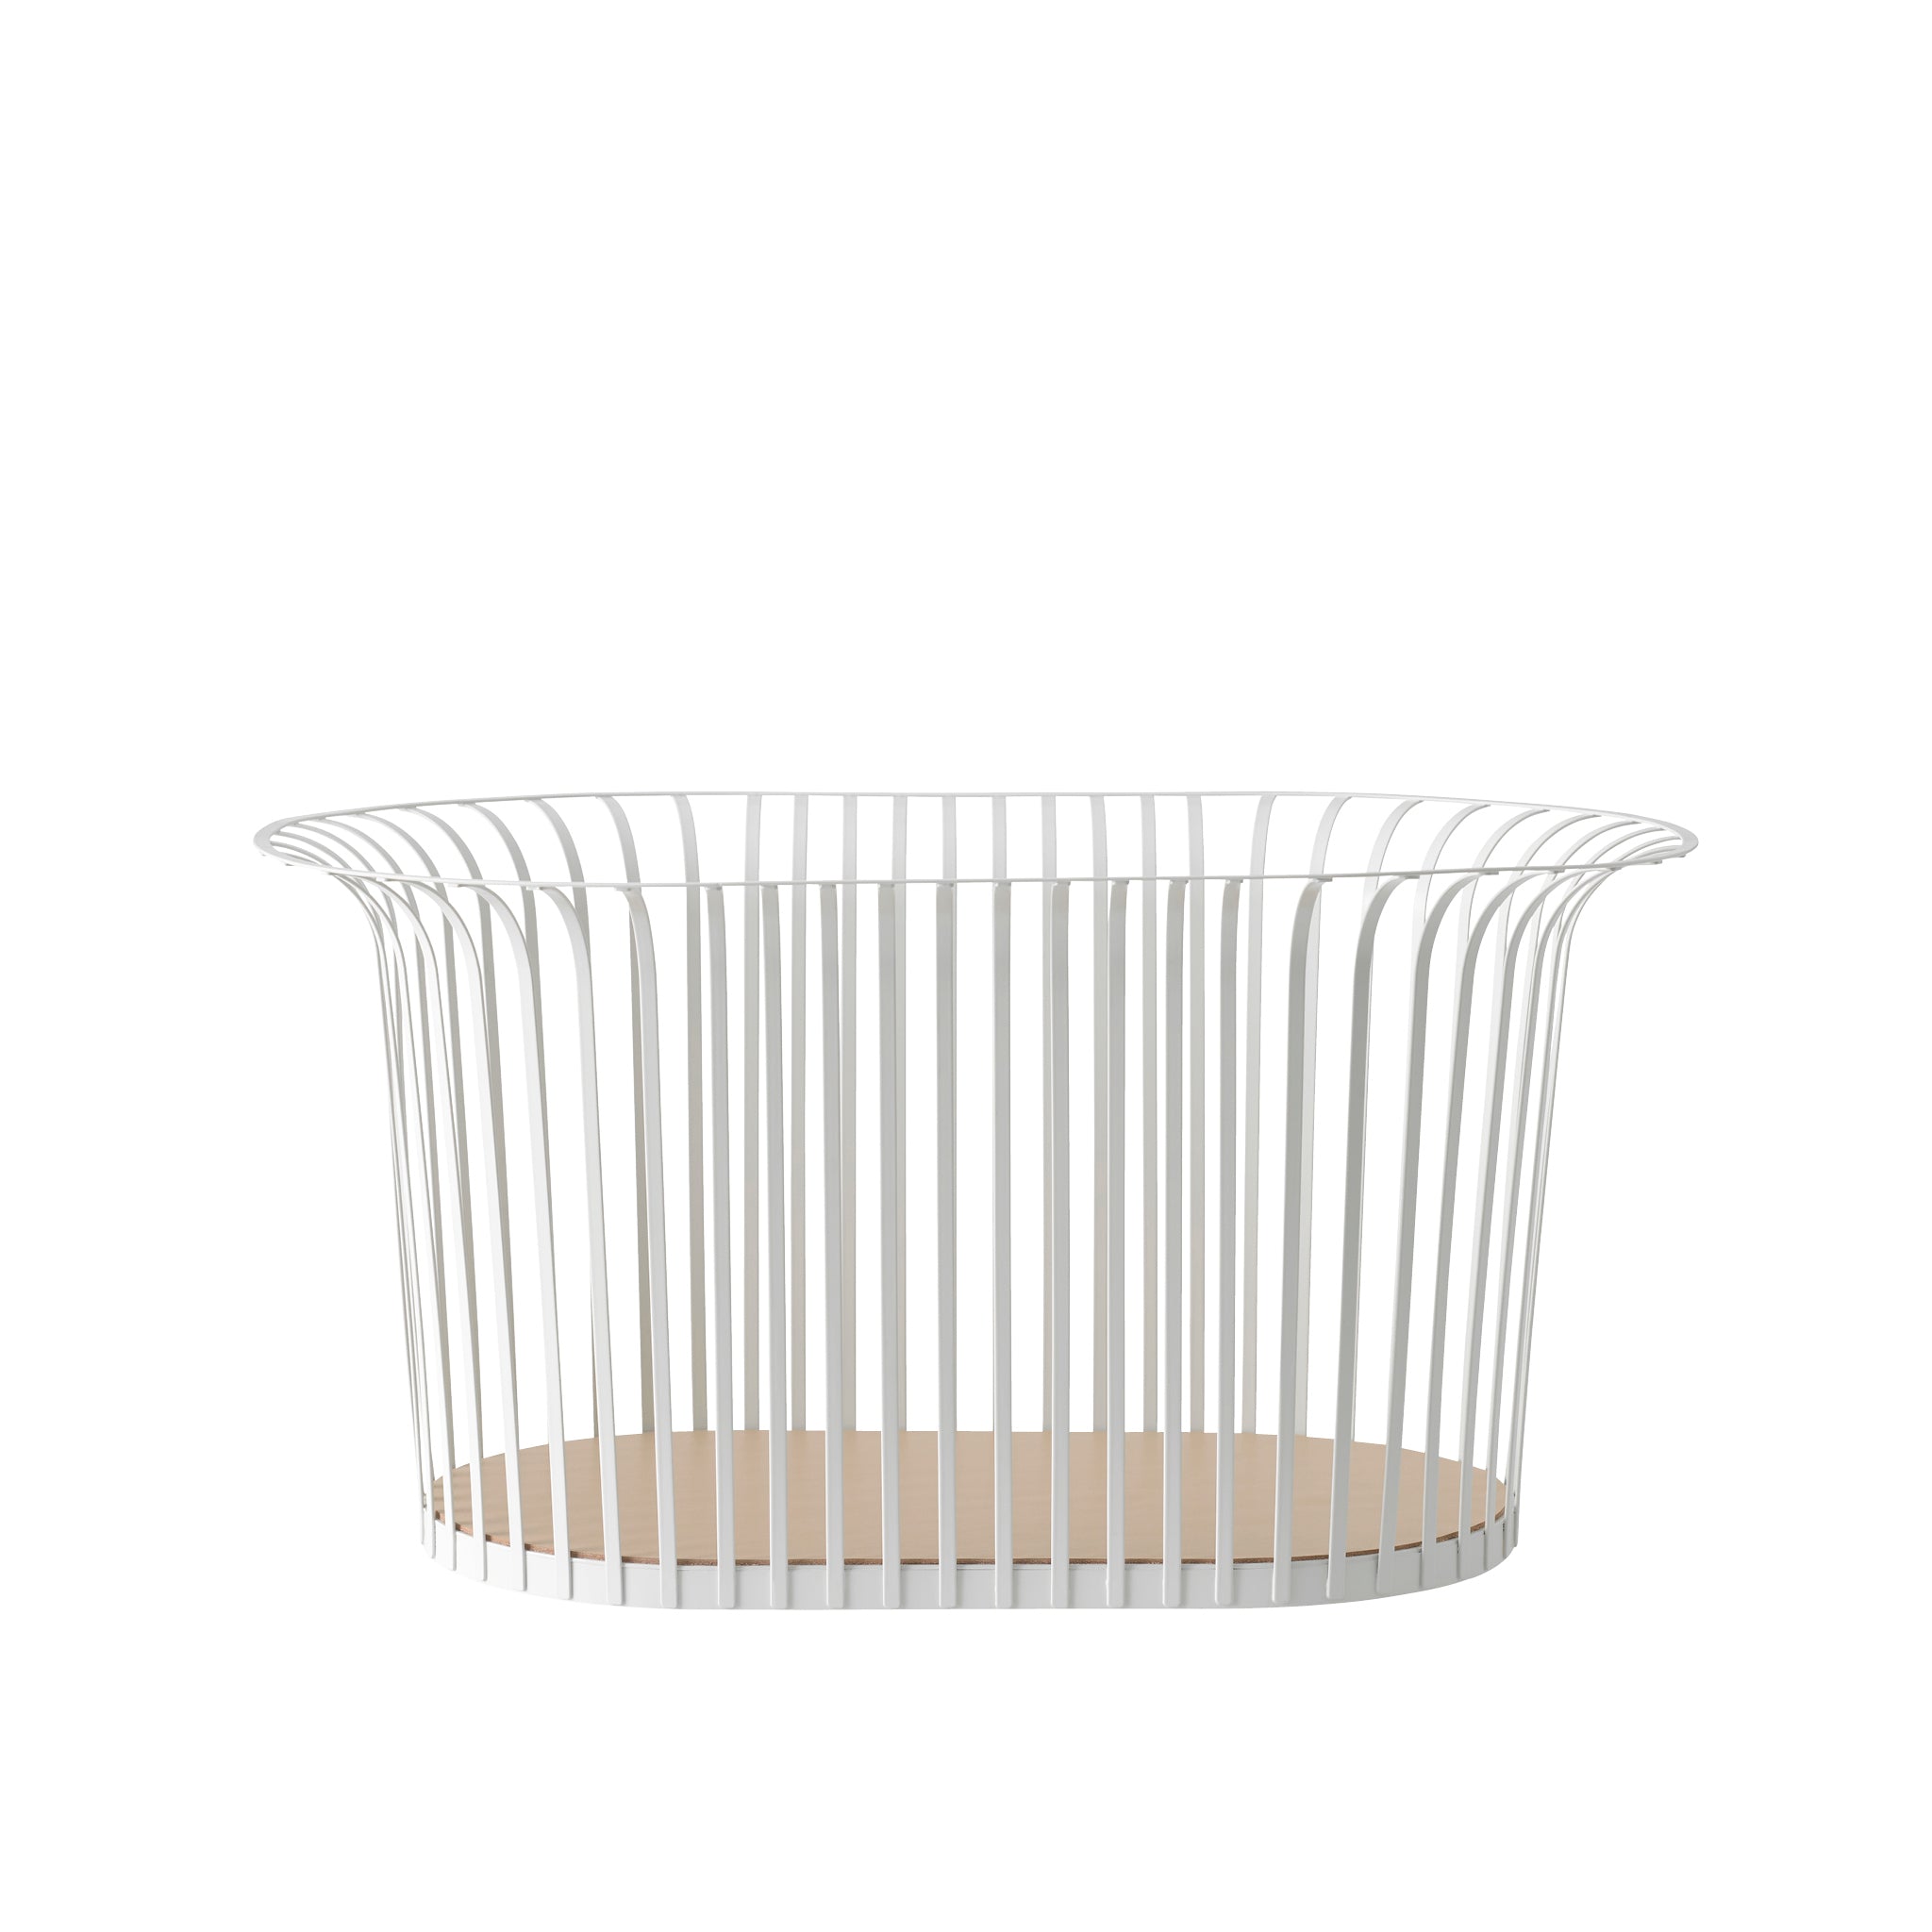 Ribbon Basket by Norm Architects